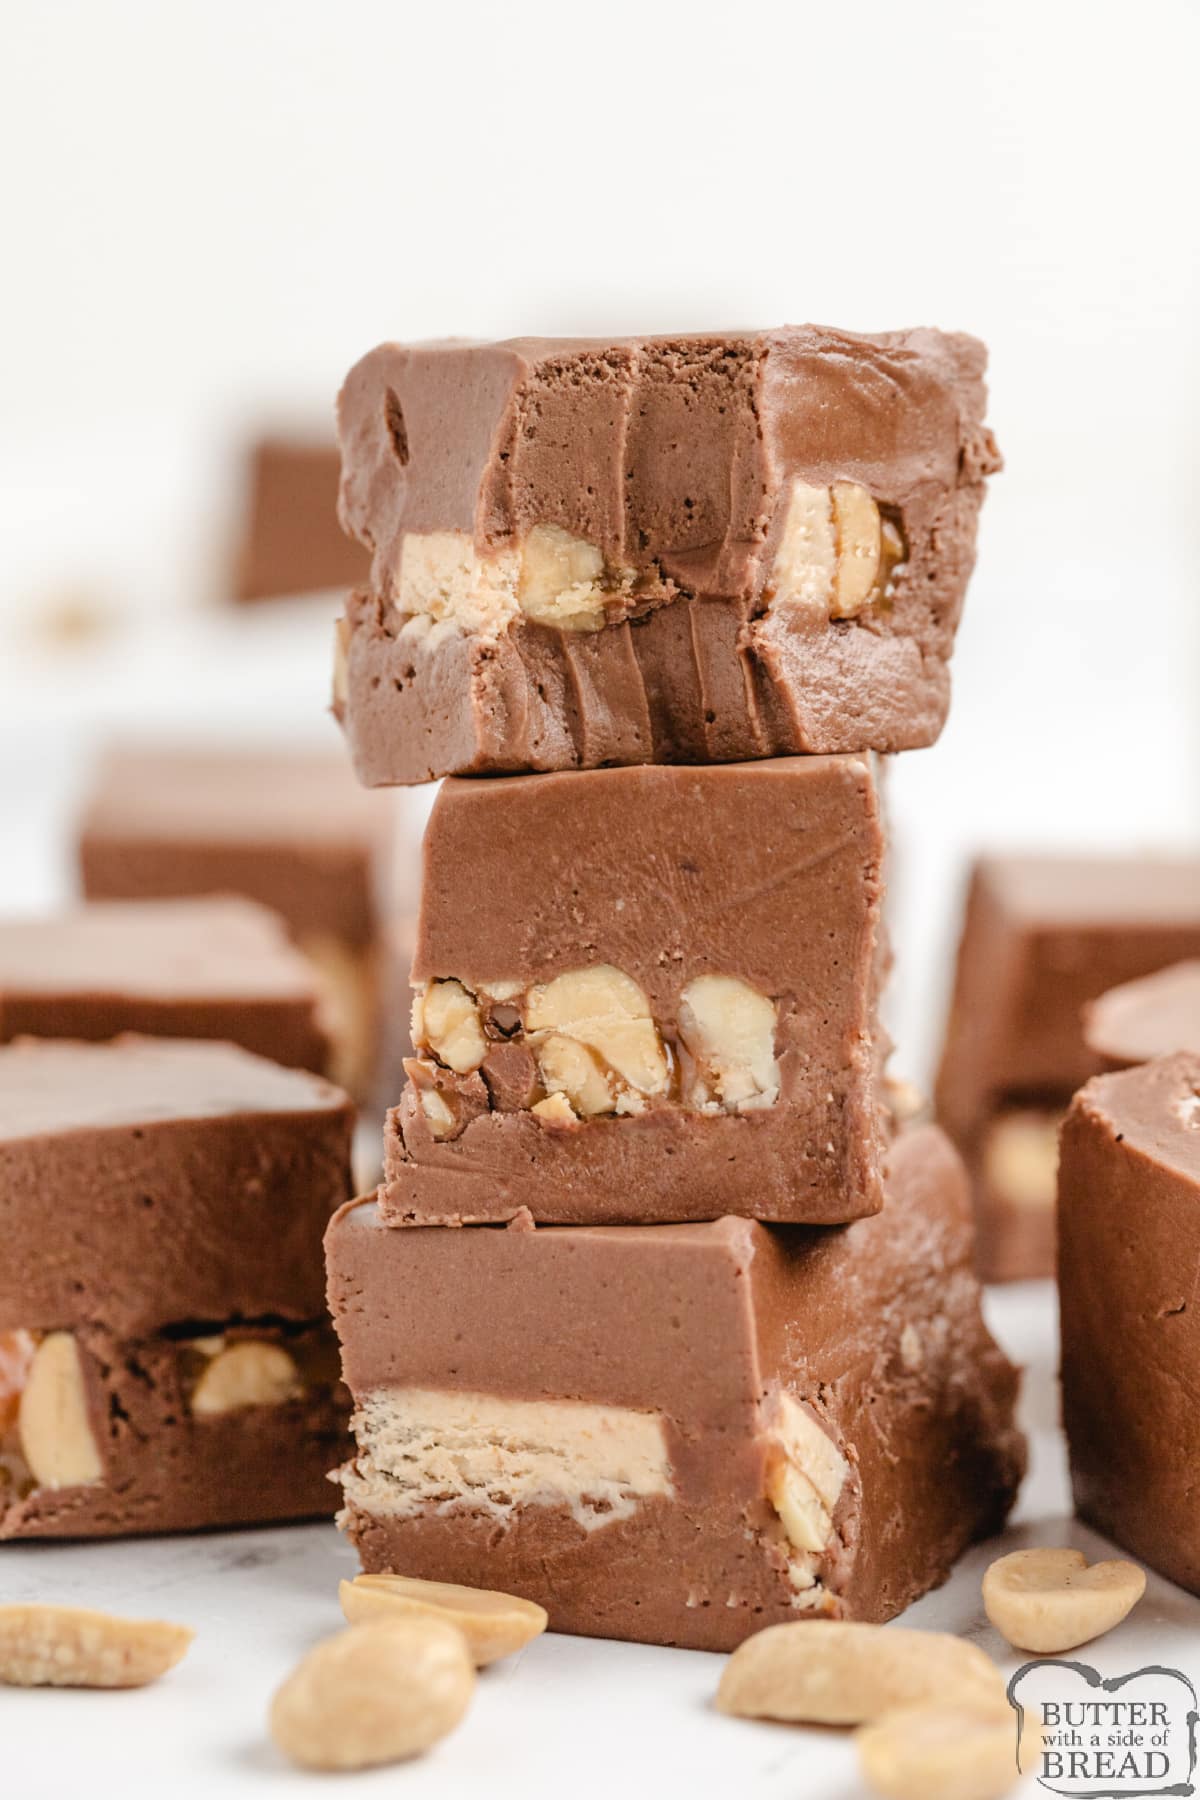 Snickers Fudge takes a traditional marshmallow cream fudge recipe to the next level by adding sliced Snickers bars in the middle! This rich and creamy fudge recipe is easy to make and absolutely delicious to eat. 